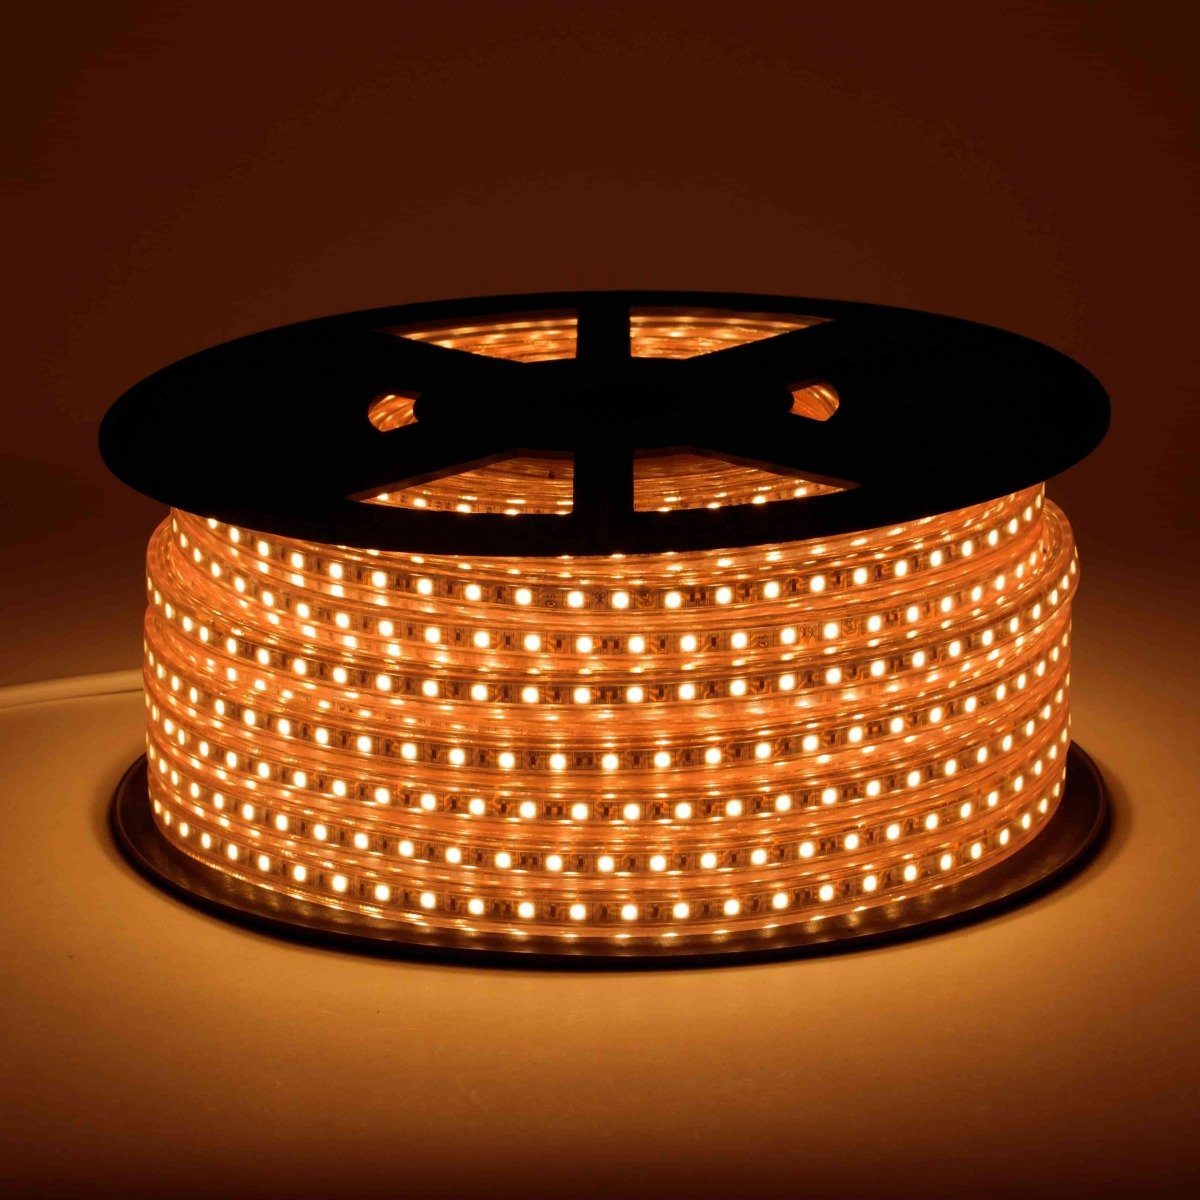 illuminated 120V led strip lights reel with visible chips in amber